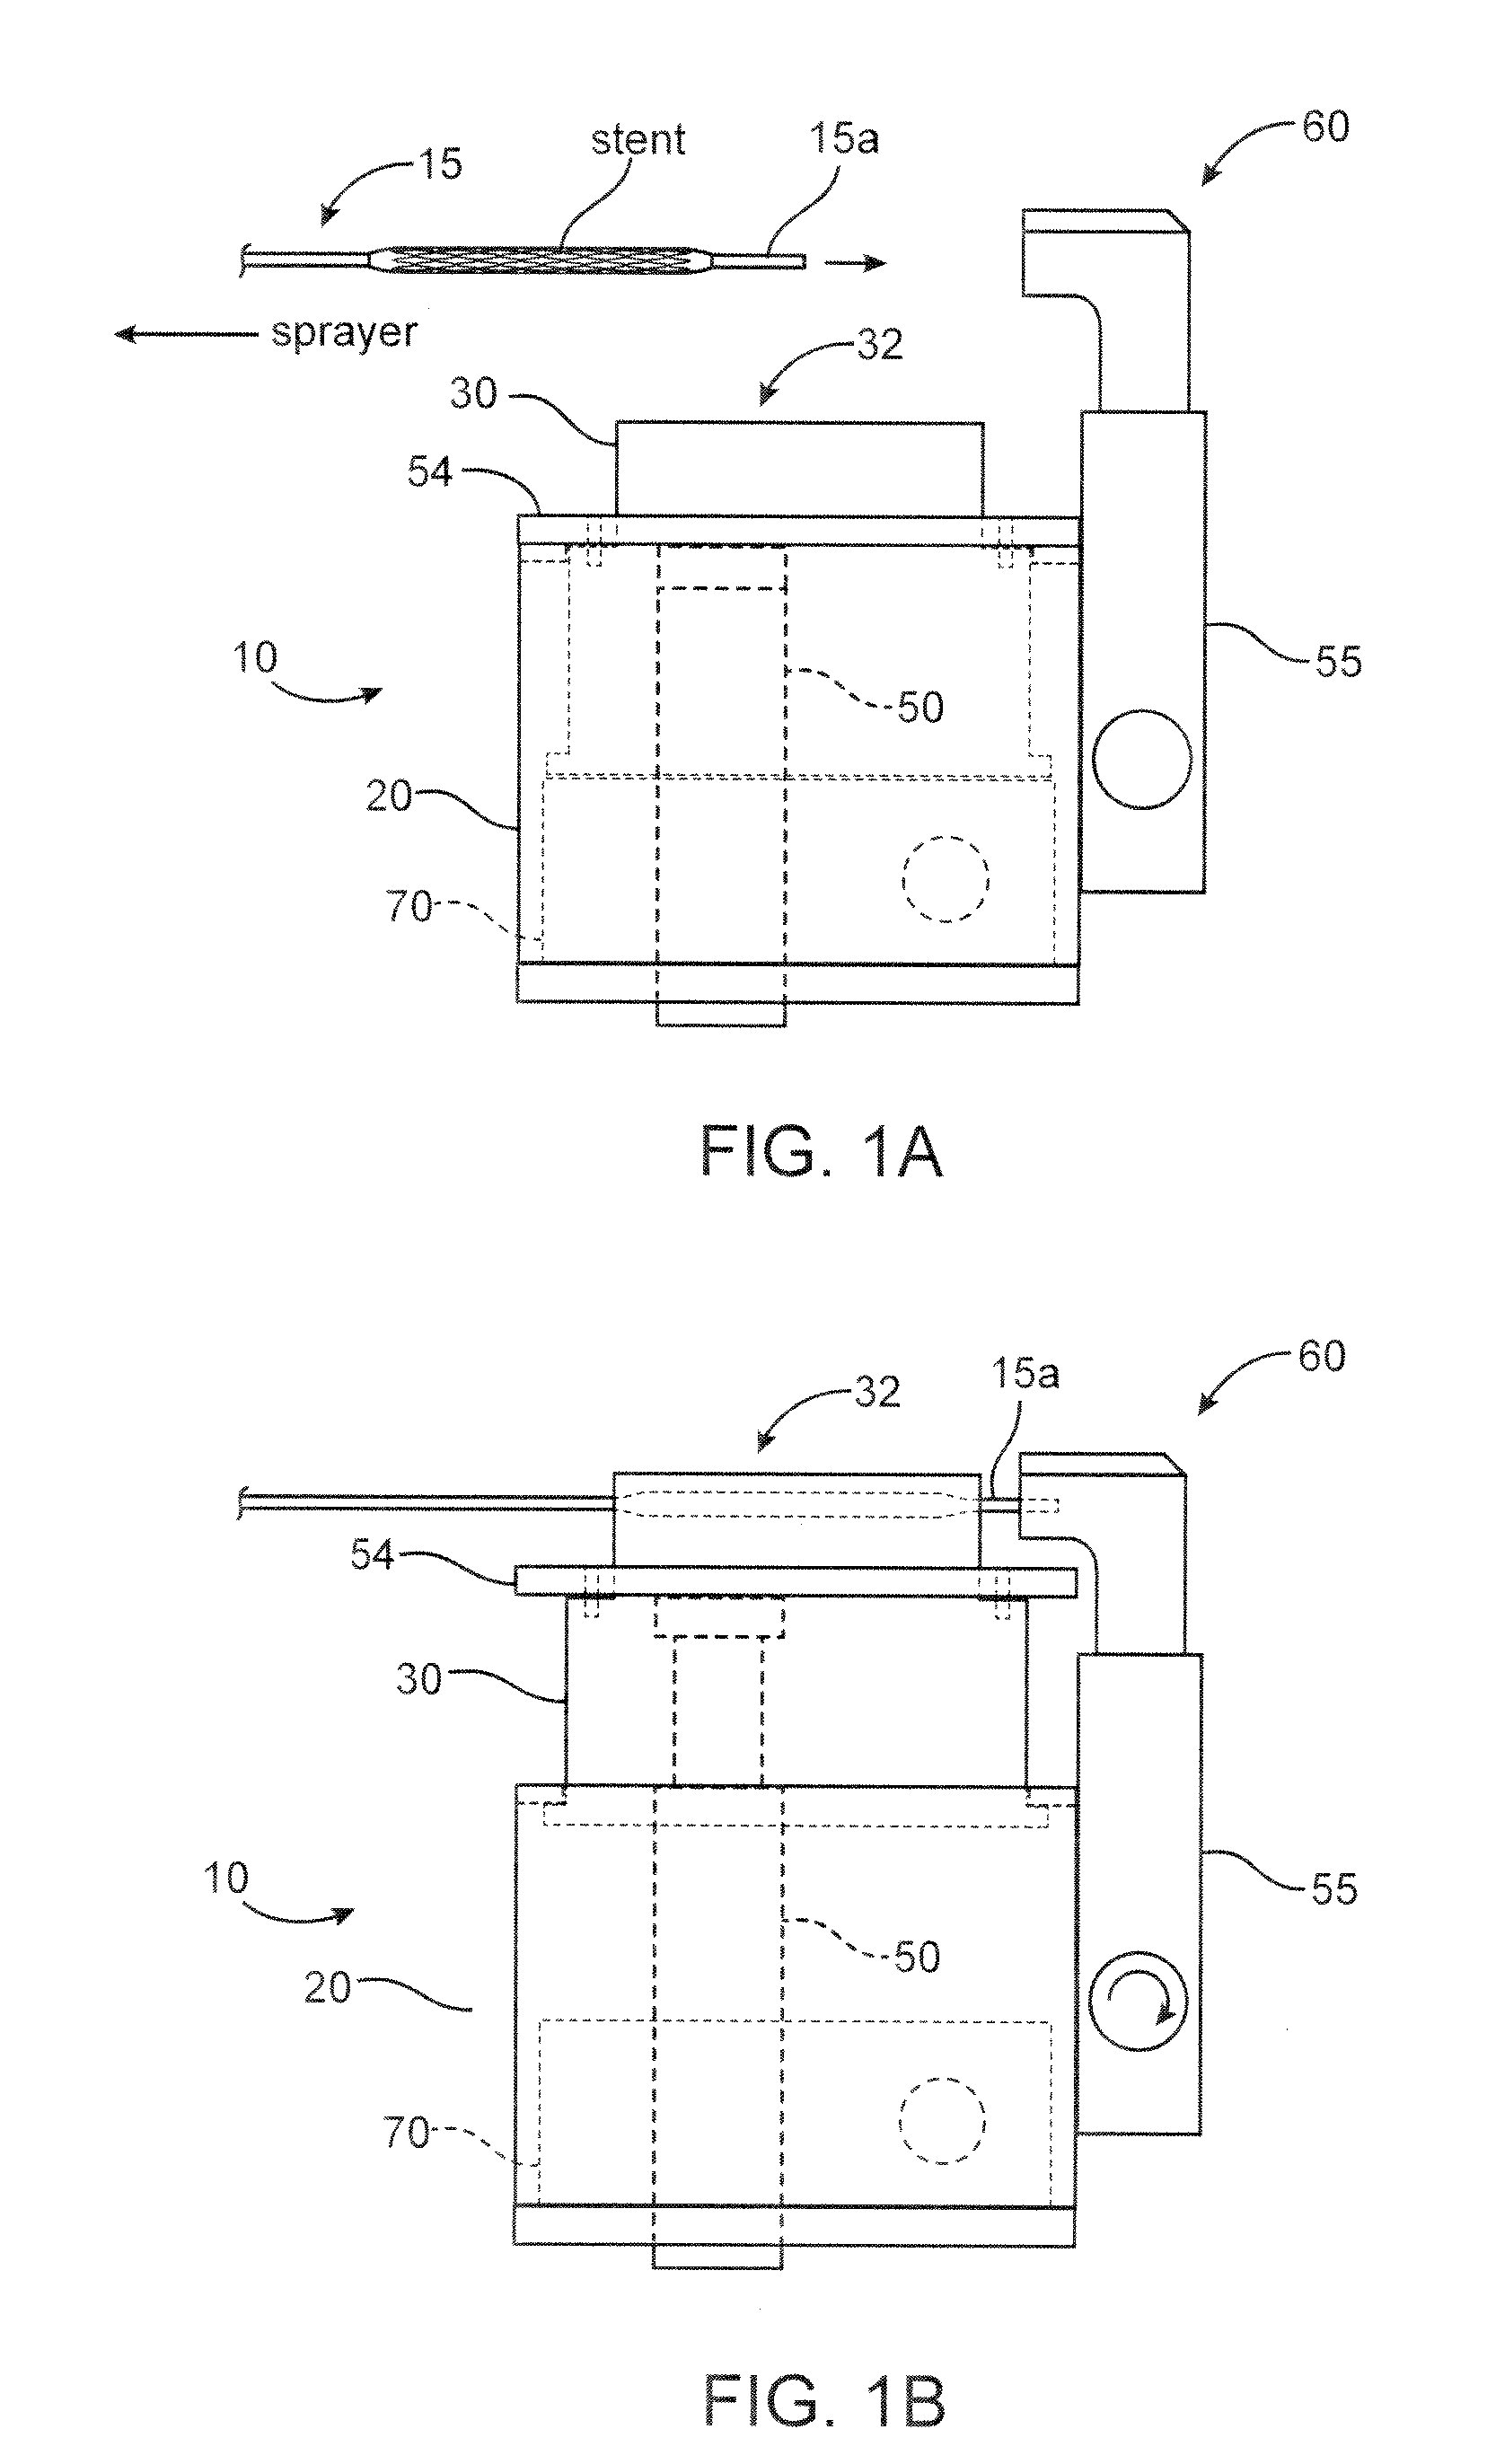 Dryers For Removing Solvent From A Drug-Eluting Coating Applied To Medical Devices